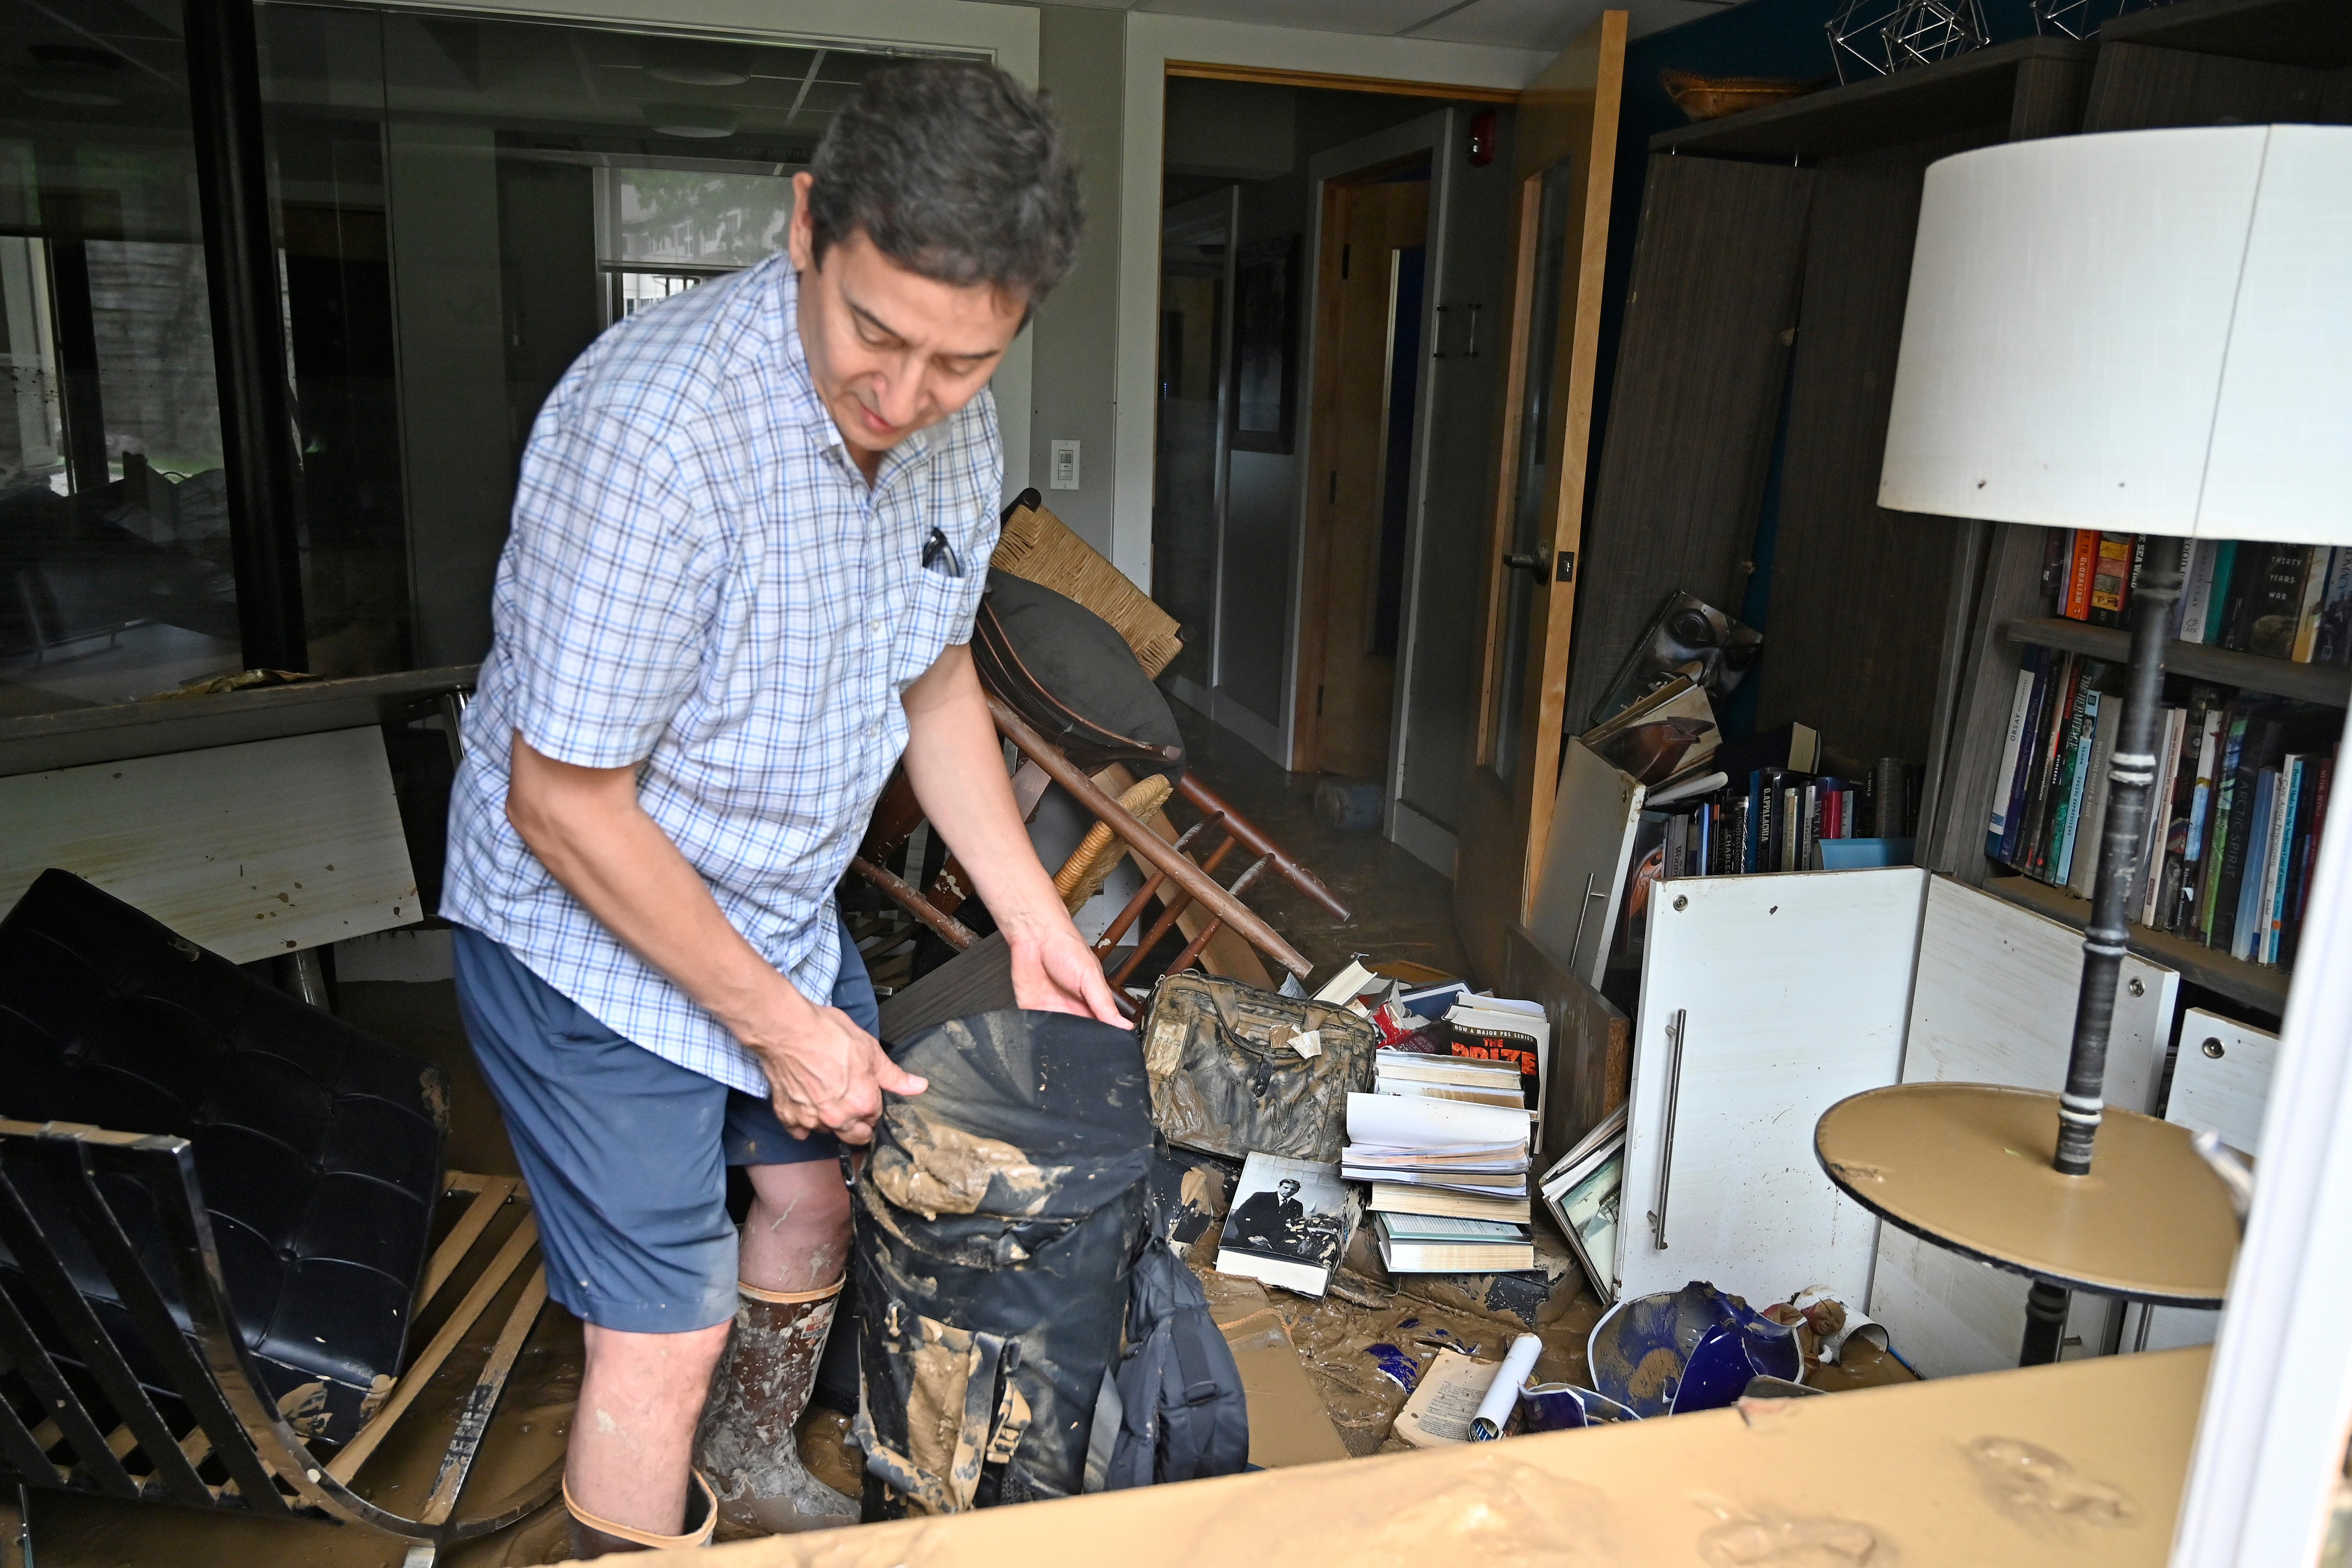 Will Anderson, Director of the Hindman Settlement School sorts through  the mud covered objects in his office in Hindman, Ky., Friday, July 29,  2022. (Photo: Timothy D. Easley, AP)